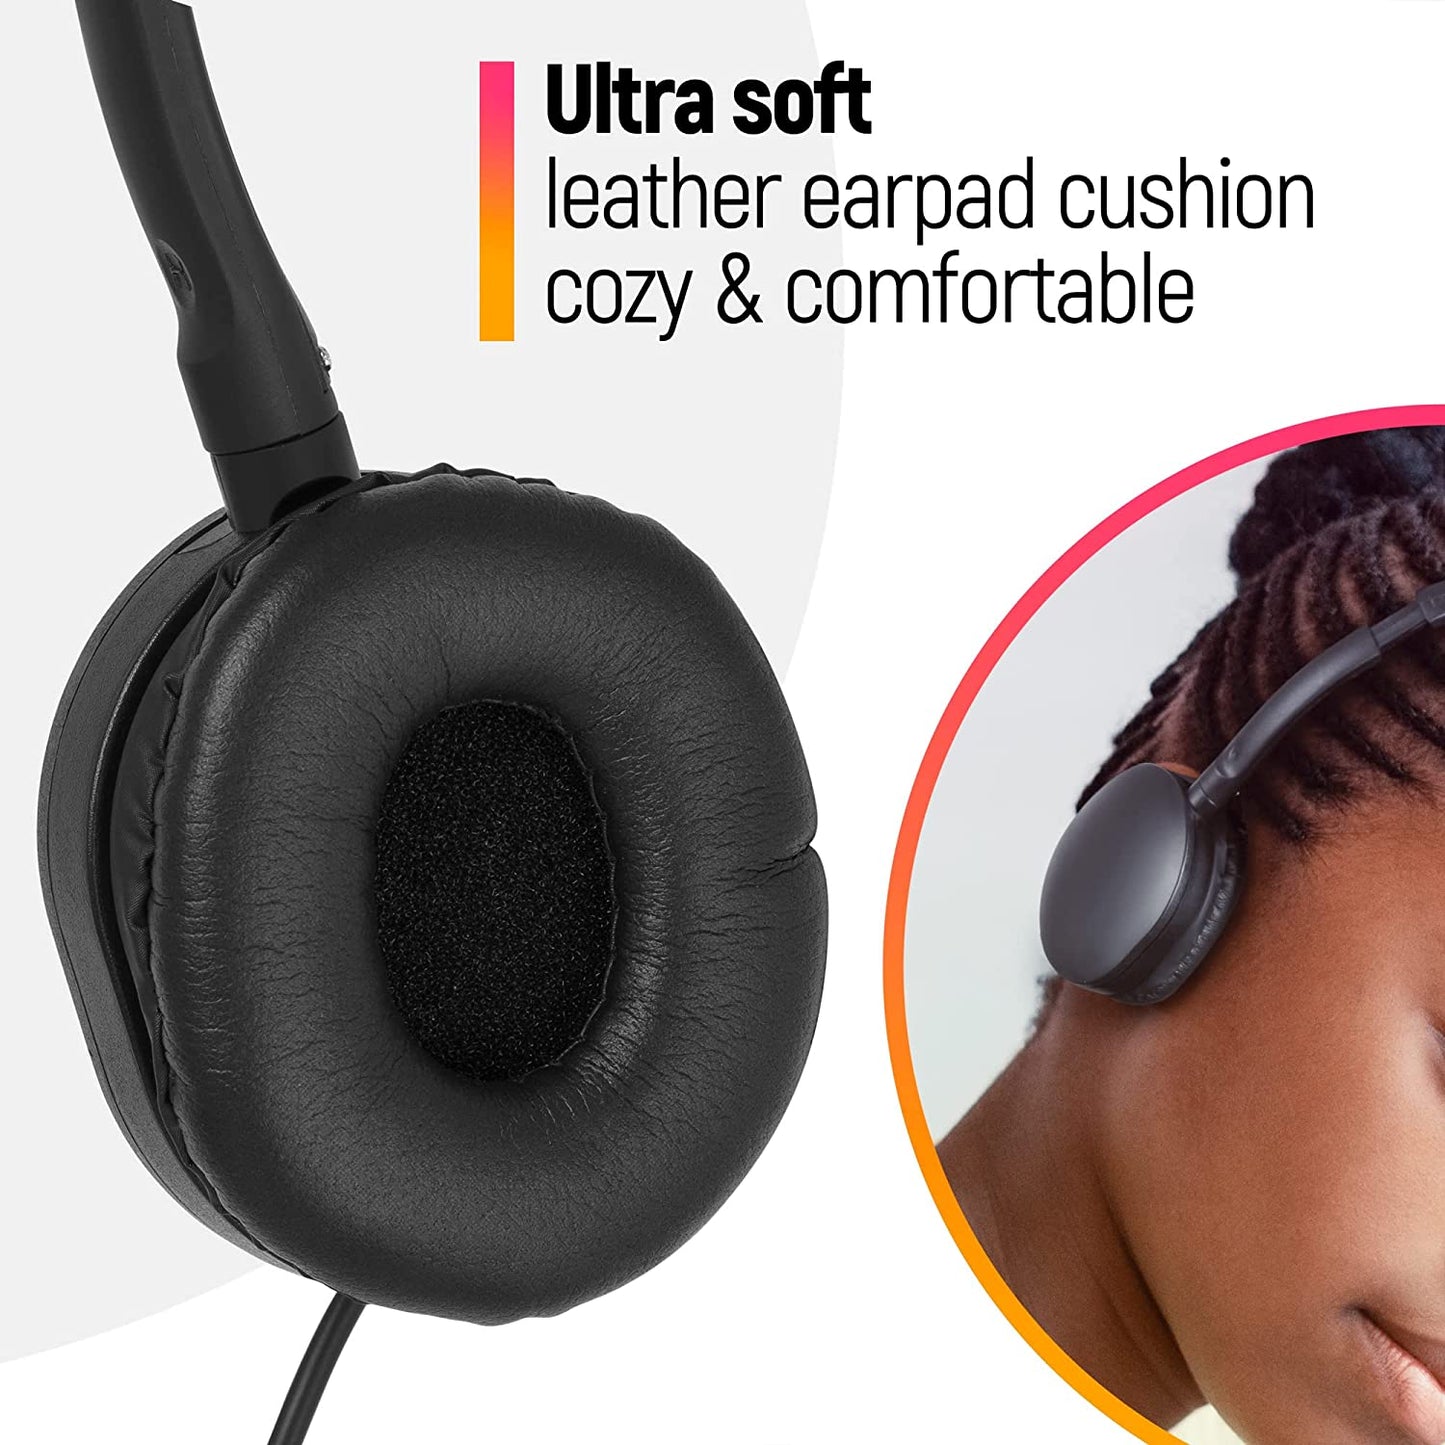 JustJamz® Headphones | 30 Pack | Wholesale Bulk Headphones | Headphones with Microphone | Bulk Over-Ear Headphones with Mic | Foldable with Soft Leather Cushion | HQ Stereo Sound 3.5mm Jack (Black)